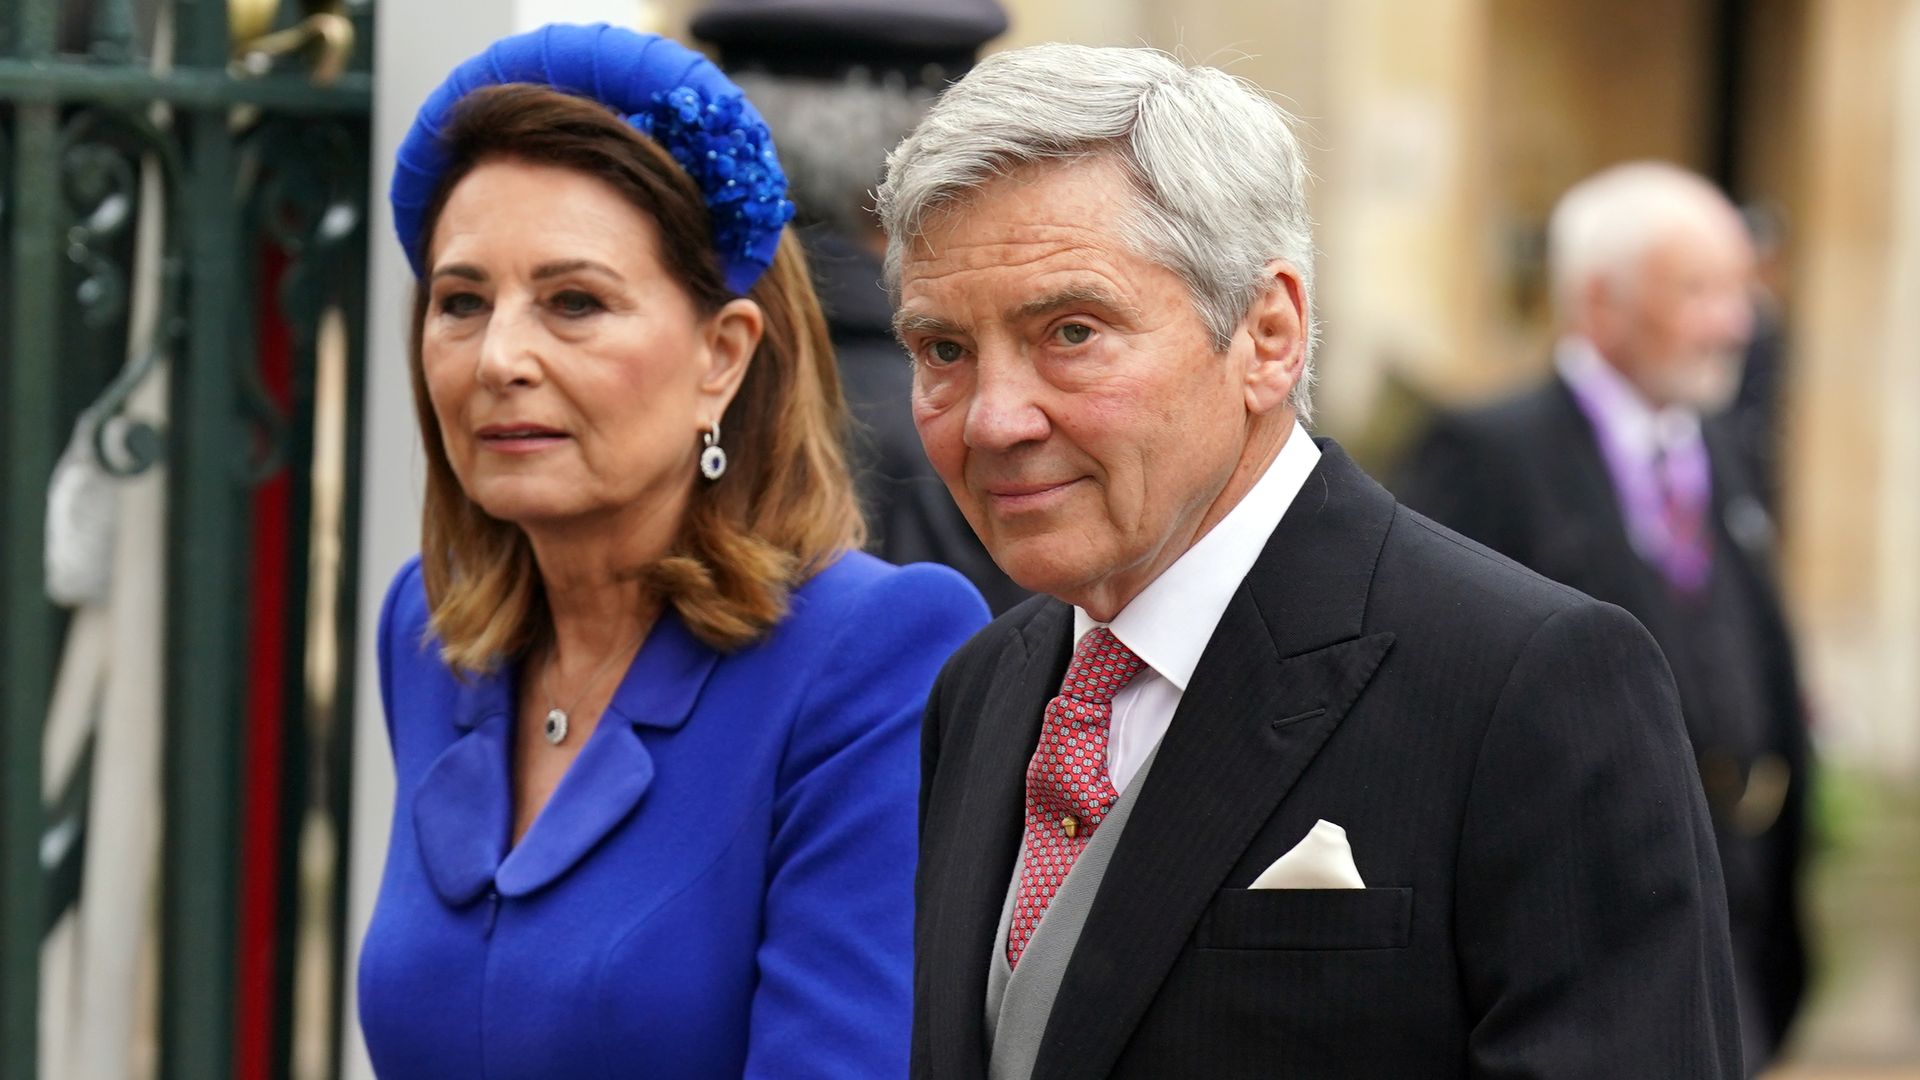 Michael Middleton and Carole Middleton attend King Charles' coronation